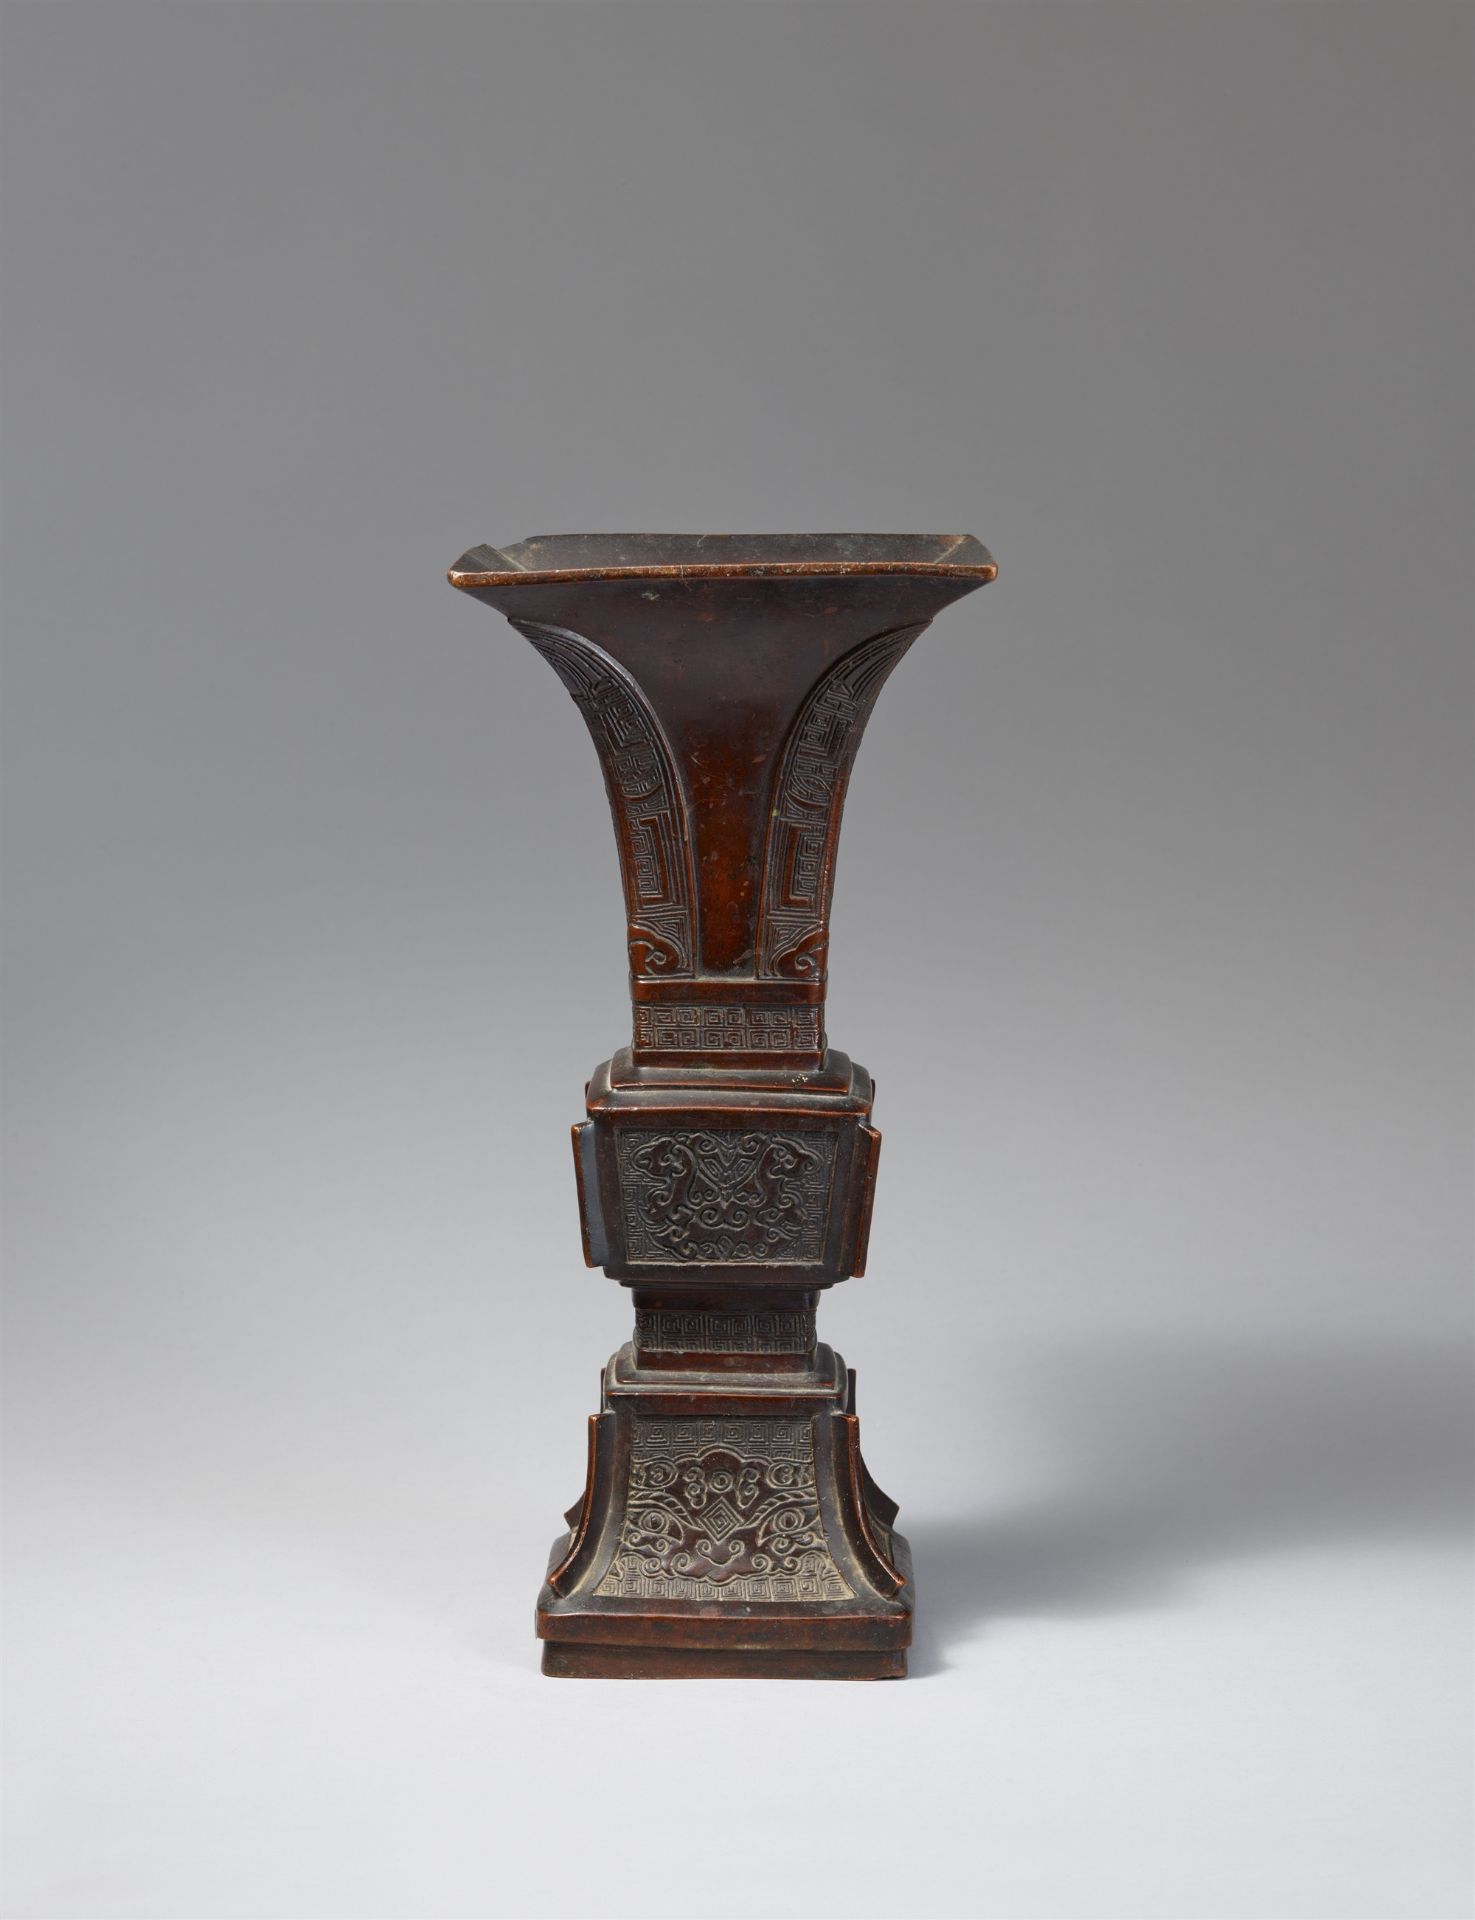 A copper alloy bronze altar vase. Qing dynasty, 19th century - Image 2 of 2